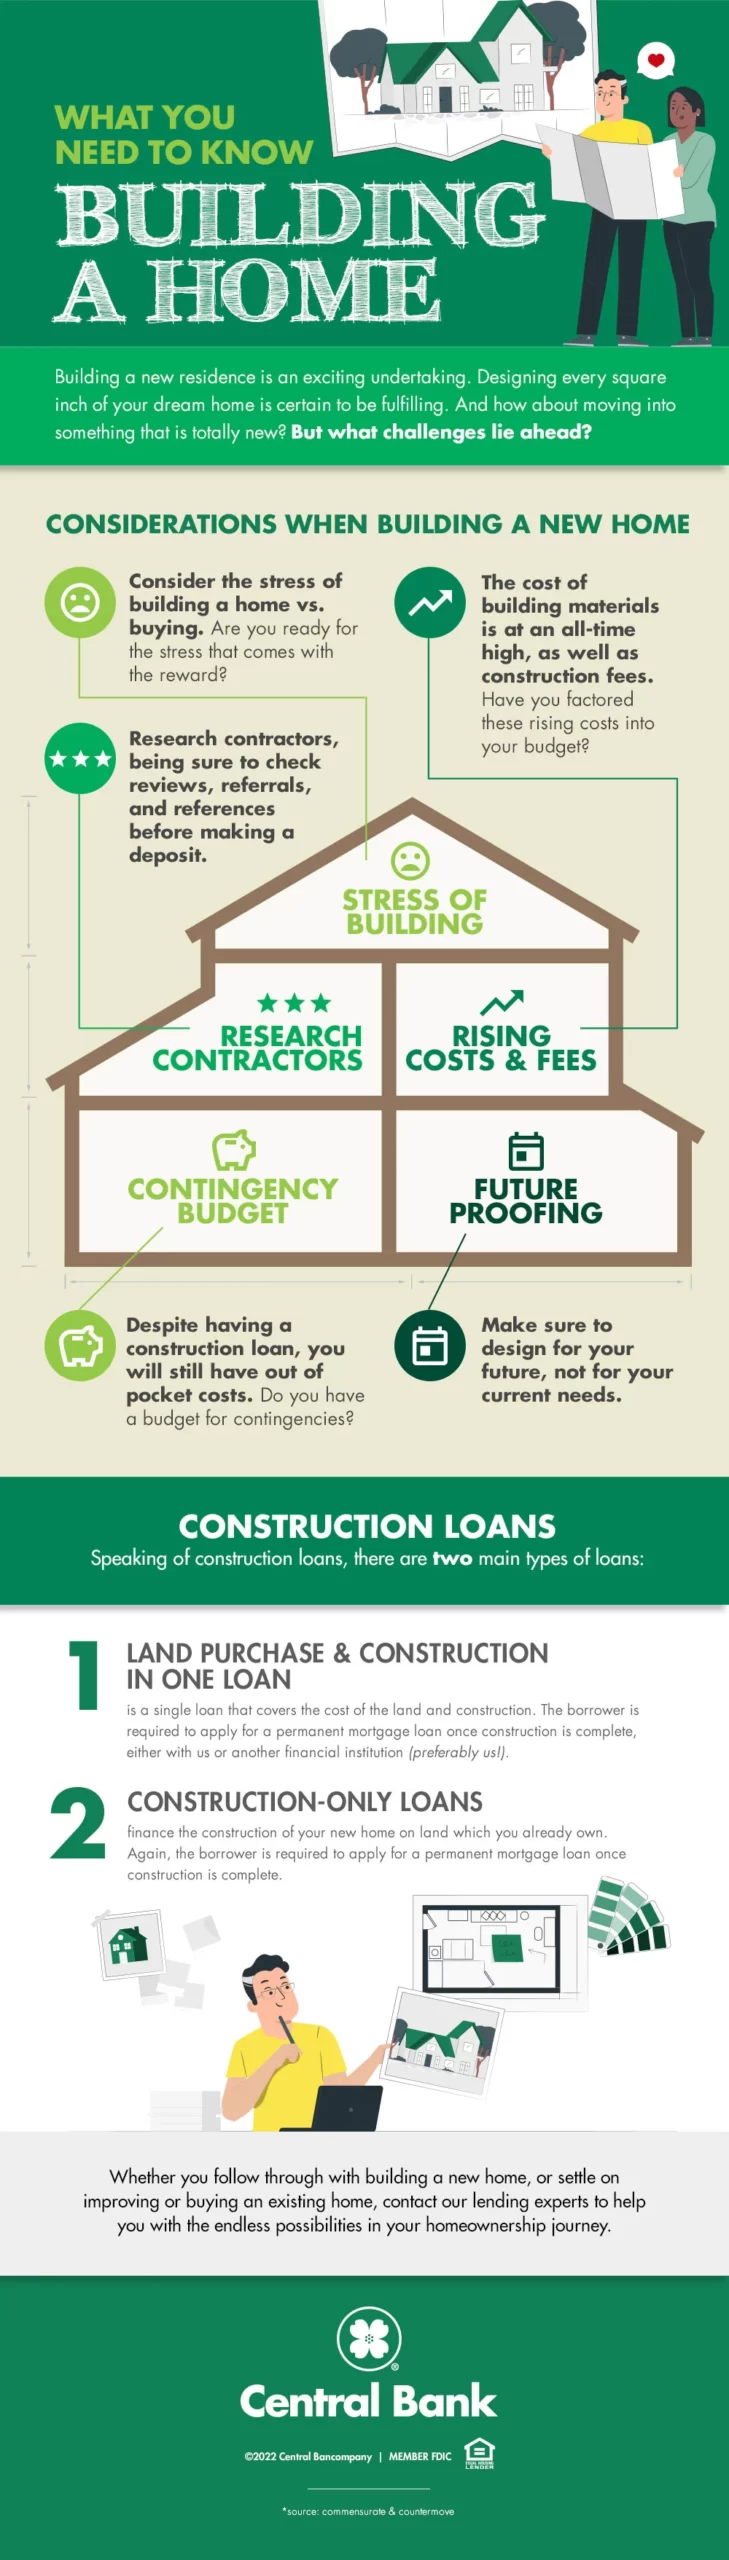 building a home infographic